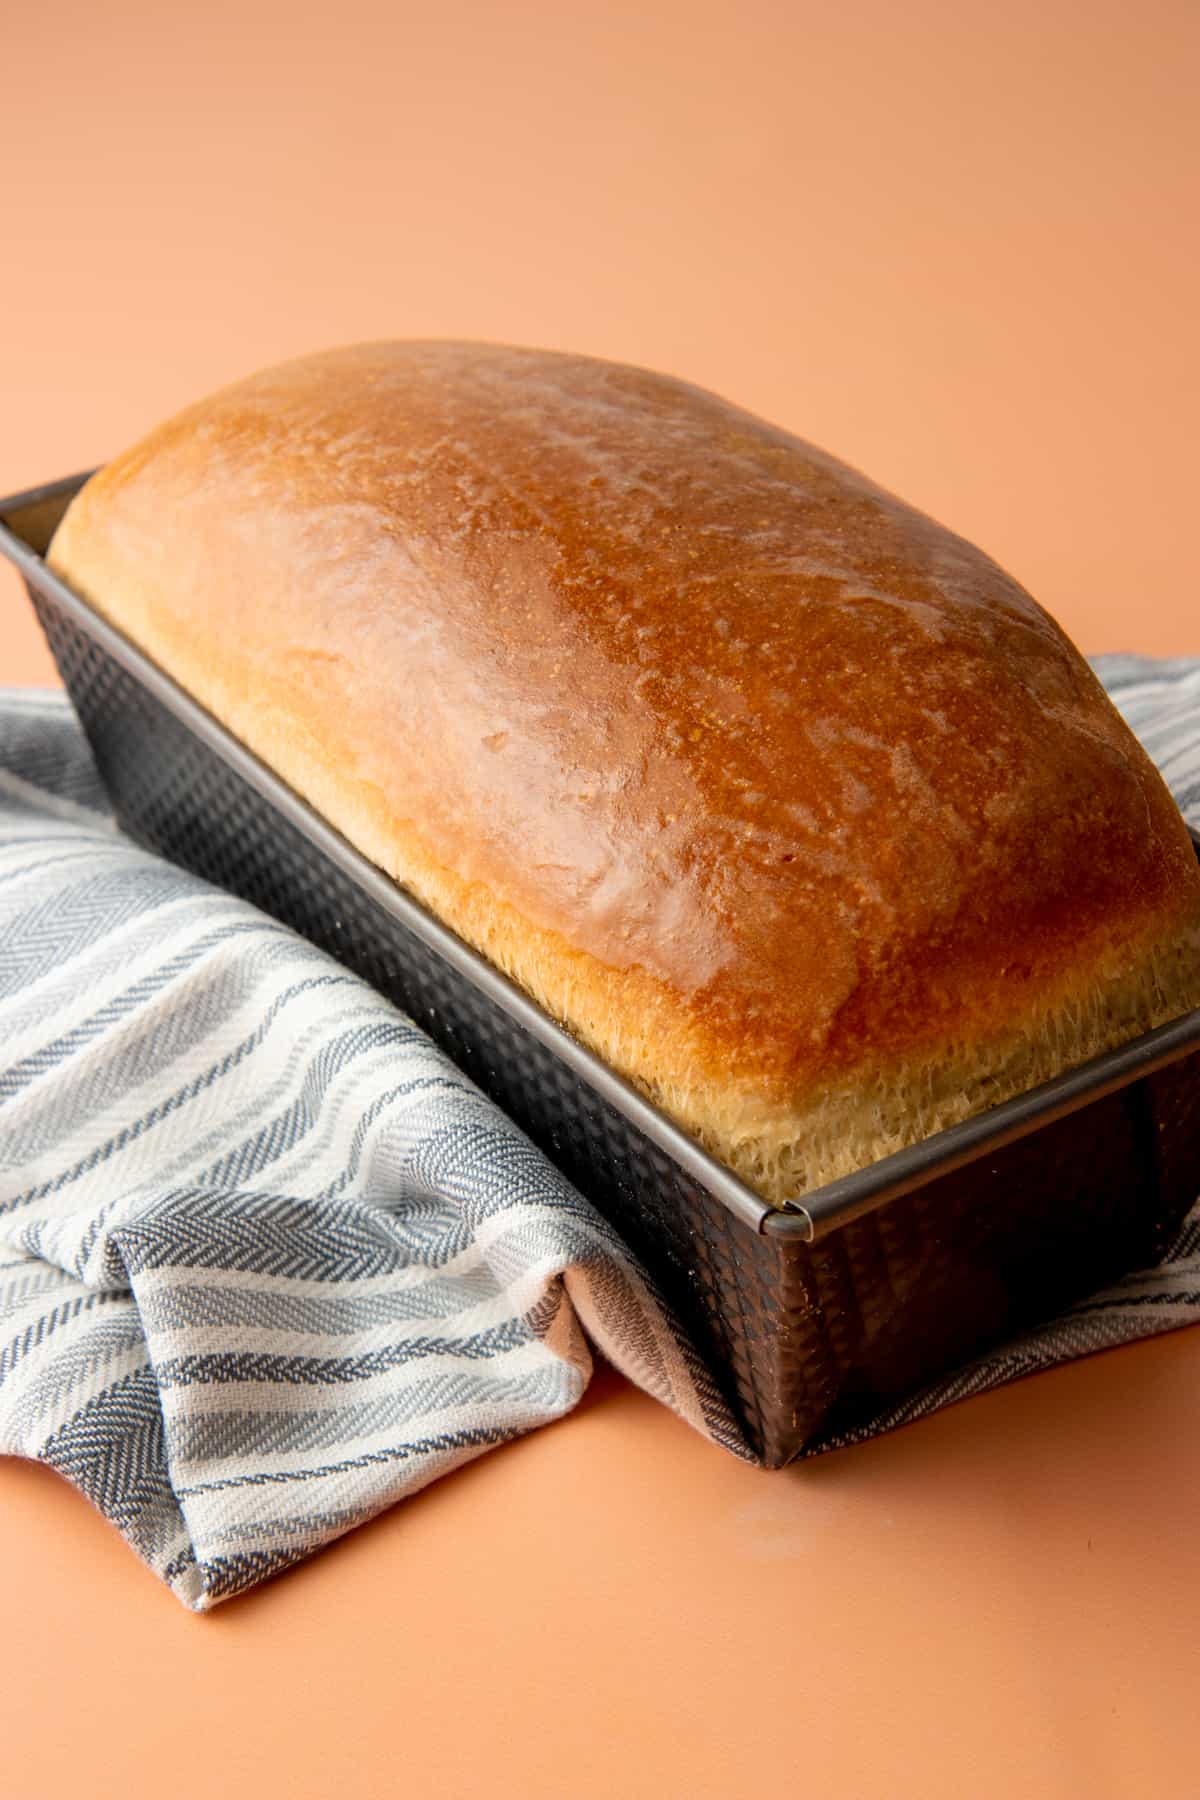 A baked loaf of bread sits in a loaf pan on top of a cloth napkin.